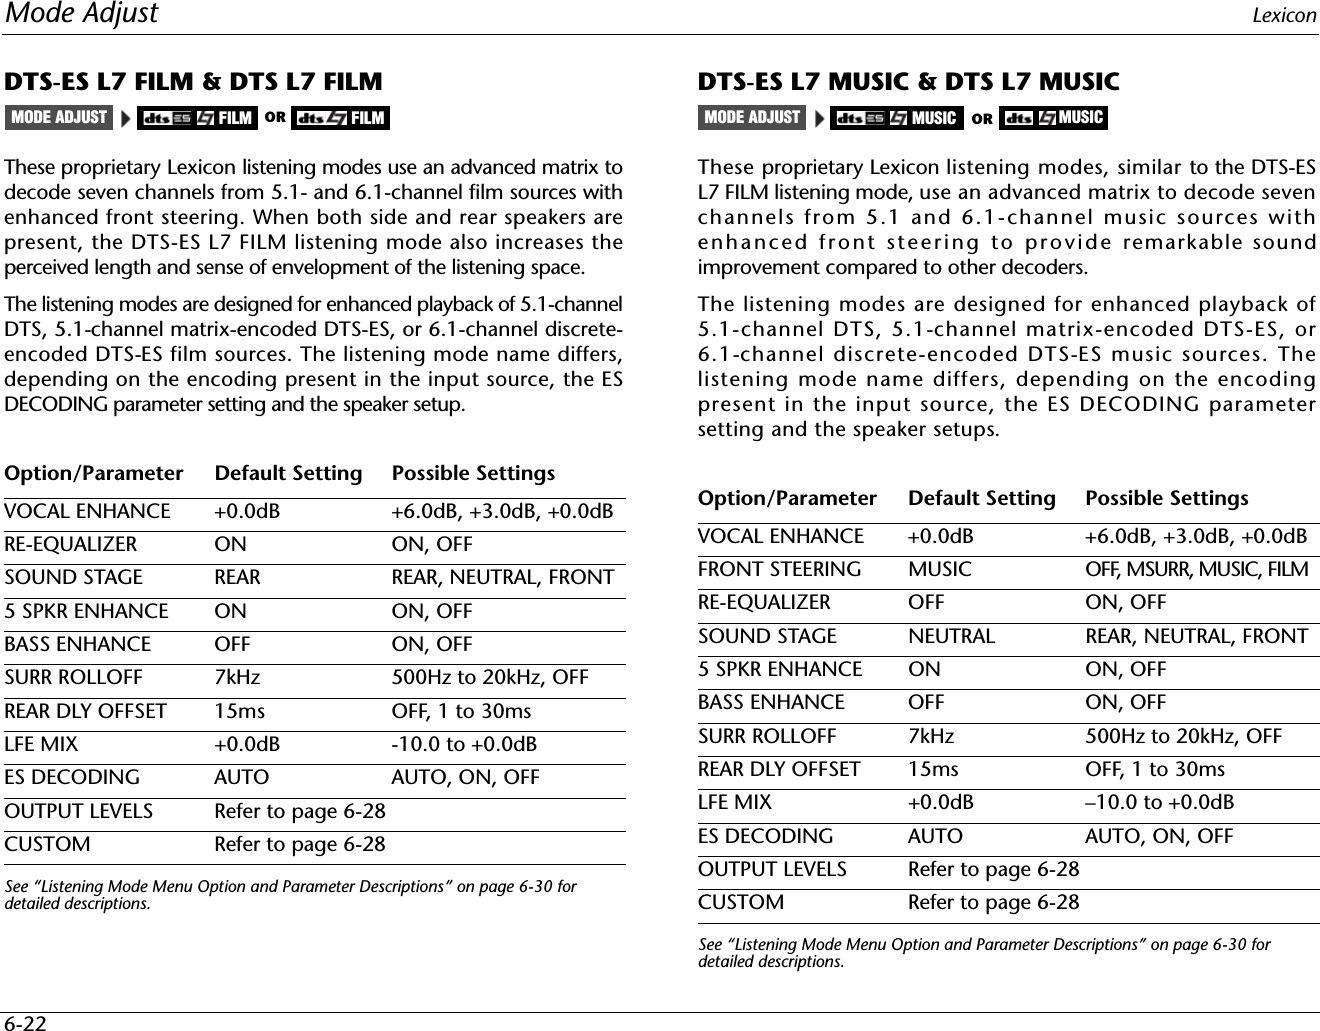 Mode Adjust Lexicon6-22DTS-ES L7 FILM &amp; DTS L7 FILMThese proprietary Lexicon listening modes use an advanced matrix todecode seven channels from 5.1- and 6.1-channel film sources withenhanced front steering. When both side and rear speakers arepresent, the DTS-ES L7 FILM listening mode also increases theperceived length and sense of envelopment of the listening space. The listening modes are designed for enhanced playback of 5.1-channelDTS, 5.1-channel matrix-encoded DTS-ES, or 6.1-channel discrete-encoded DTS-ES film sources. The listening mode name differs,depending on the encoding present in the input source, the ESDECODING parameter setting and the speaker setup.See “Listening Mode Menu Option and Parameter Descriptions” on page 6-30 for detailed descriptions.DTS-ES L7 MUSIC &amp; DTS L7 MUSICThese proprietary Lexicon listening modes, similar to the DTS-ESL7 FILM listening mode, use an advanced matrix to decode sevenchannels from 5.1 and 6.1-channel music sources withenhanced front steering to provide remarkable soundimprovement compared to other decoders. The listening modes are designed for enhanced playback of5.1-channel DTS, 5.1-channel matrix-encoded DTS-ES, or6.1-channel discrete-encoded DTS-ES music sources. Thelistening mode name differs, depending on the encodingpresent in the input source, the ES DECODING parametersetting and the speaker setups.See “Listening Mode Menu Option and Parameter Descriptions” on page 6-30 for detailed descriptions.Option/Parameter Default Setting Possible SettingsVOCAL ENHANCE +0.0dB +6.0dB, +3.0dB, +0.0dBRE-EQUALIZER ON ON, OFFSOUND STAGE REAR REAR, NEUTRAL, FRONT5 SPKR ENHANCE ON ON, OFFBASS ENHANCE OFF ON, OFFSURR ROLLOFF 7kHz 500Hz to 20kHz, OFFREAR DLY OFFSET 15ms OFF, 1 to 30msLFE MIX +0.0dB -10.0 to +0.0dBES DECODING AUTO AUTO, ON, OFFOUTPUT LEVELS Refer to page 6-28CUSTOM Refer to page 6-28FILMMODE ADJUST FILMOROption/Parameter Default Setting Possible SettingsVOCAL ENHANCE +0.0dB +6.0dB, +3.0dB, +0.0dBFRONT STEERING MUSIC OFF, MSURR, MUSIC, FILMRE-EQUALIZER OFF ON, OFFSOUND STAGE NEUTRAL REAR, NEUTRAL, FRONT5 SPKR ENHANCE ON ON, OFFBASS ENHANCE OFF ON, OFFSURR ROLLOFF 7kHz 500Hz to 20kHz, OFFREAR DLY OFFSET 15ms OFF, 1 to 30msLFE MIX +0.0dB –10.0 to +0.0dBES DECODING AUTO AUTO, ON, OFFOUTPUT LEVELS Refer to page 6-28CUSTOM Refer to page 6-28MUSICMODE ADJUST OR MUSIC